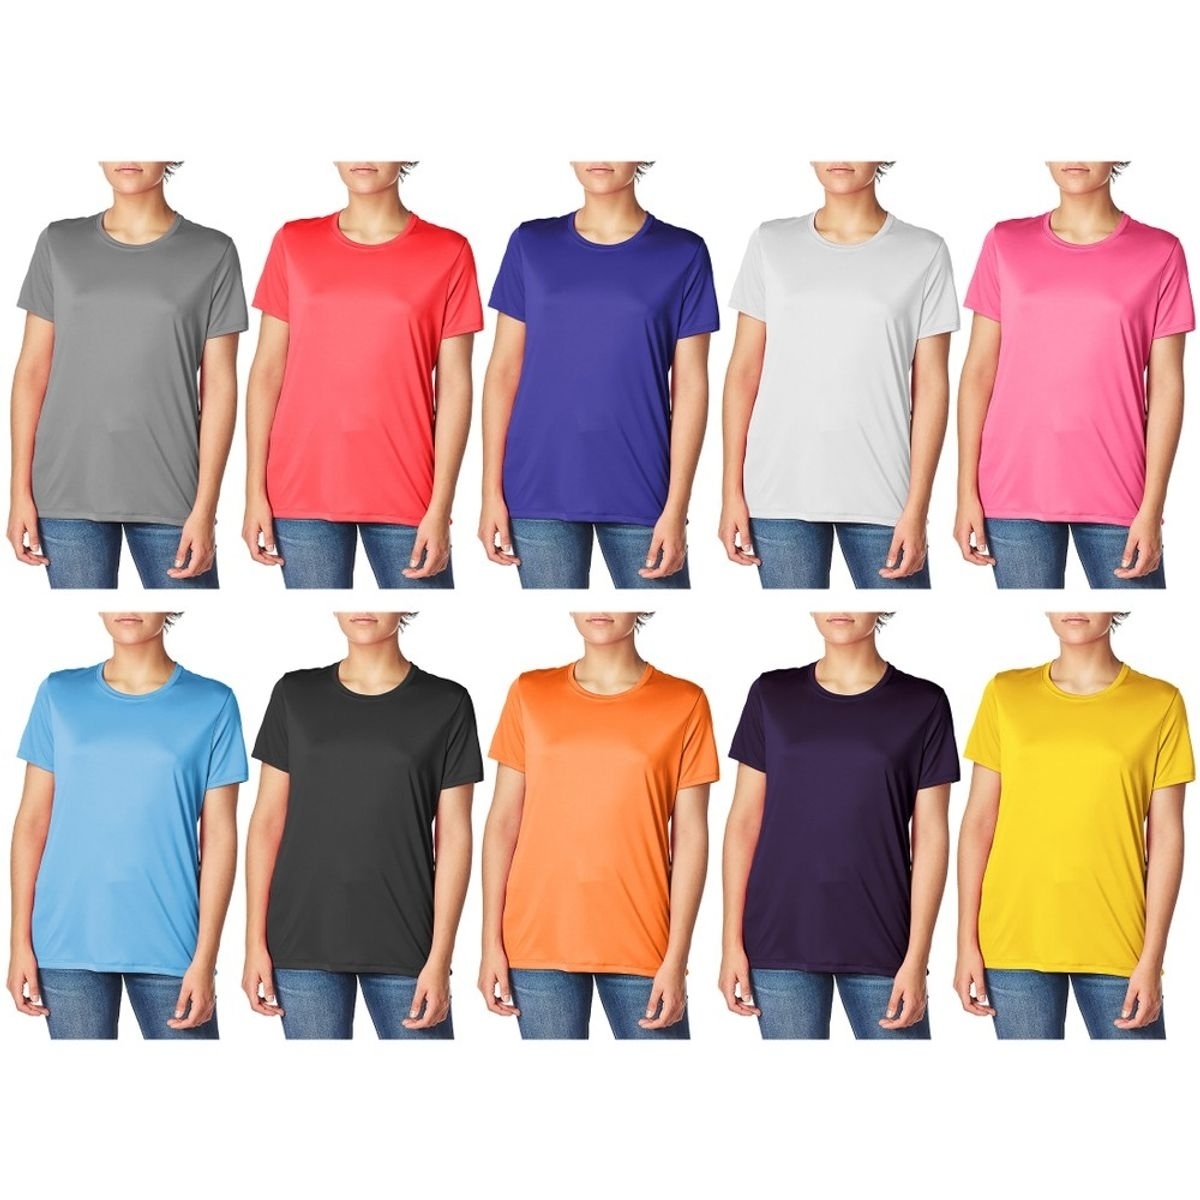 5-Pack: Women's Cool Dri-FIt Moisture Wicking Sim-Fit Long Sleeve Crew Neck T-Shirts - X-large